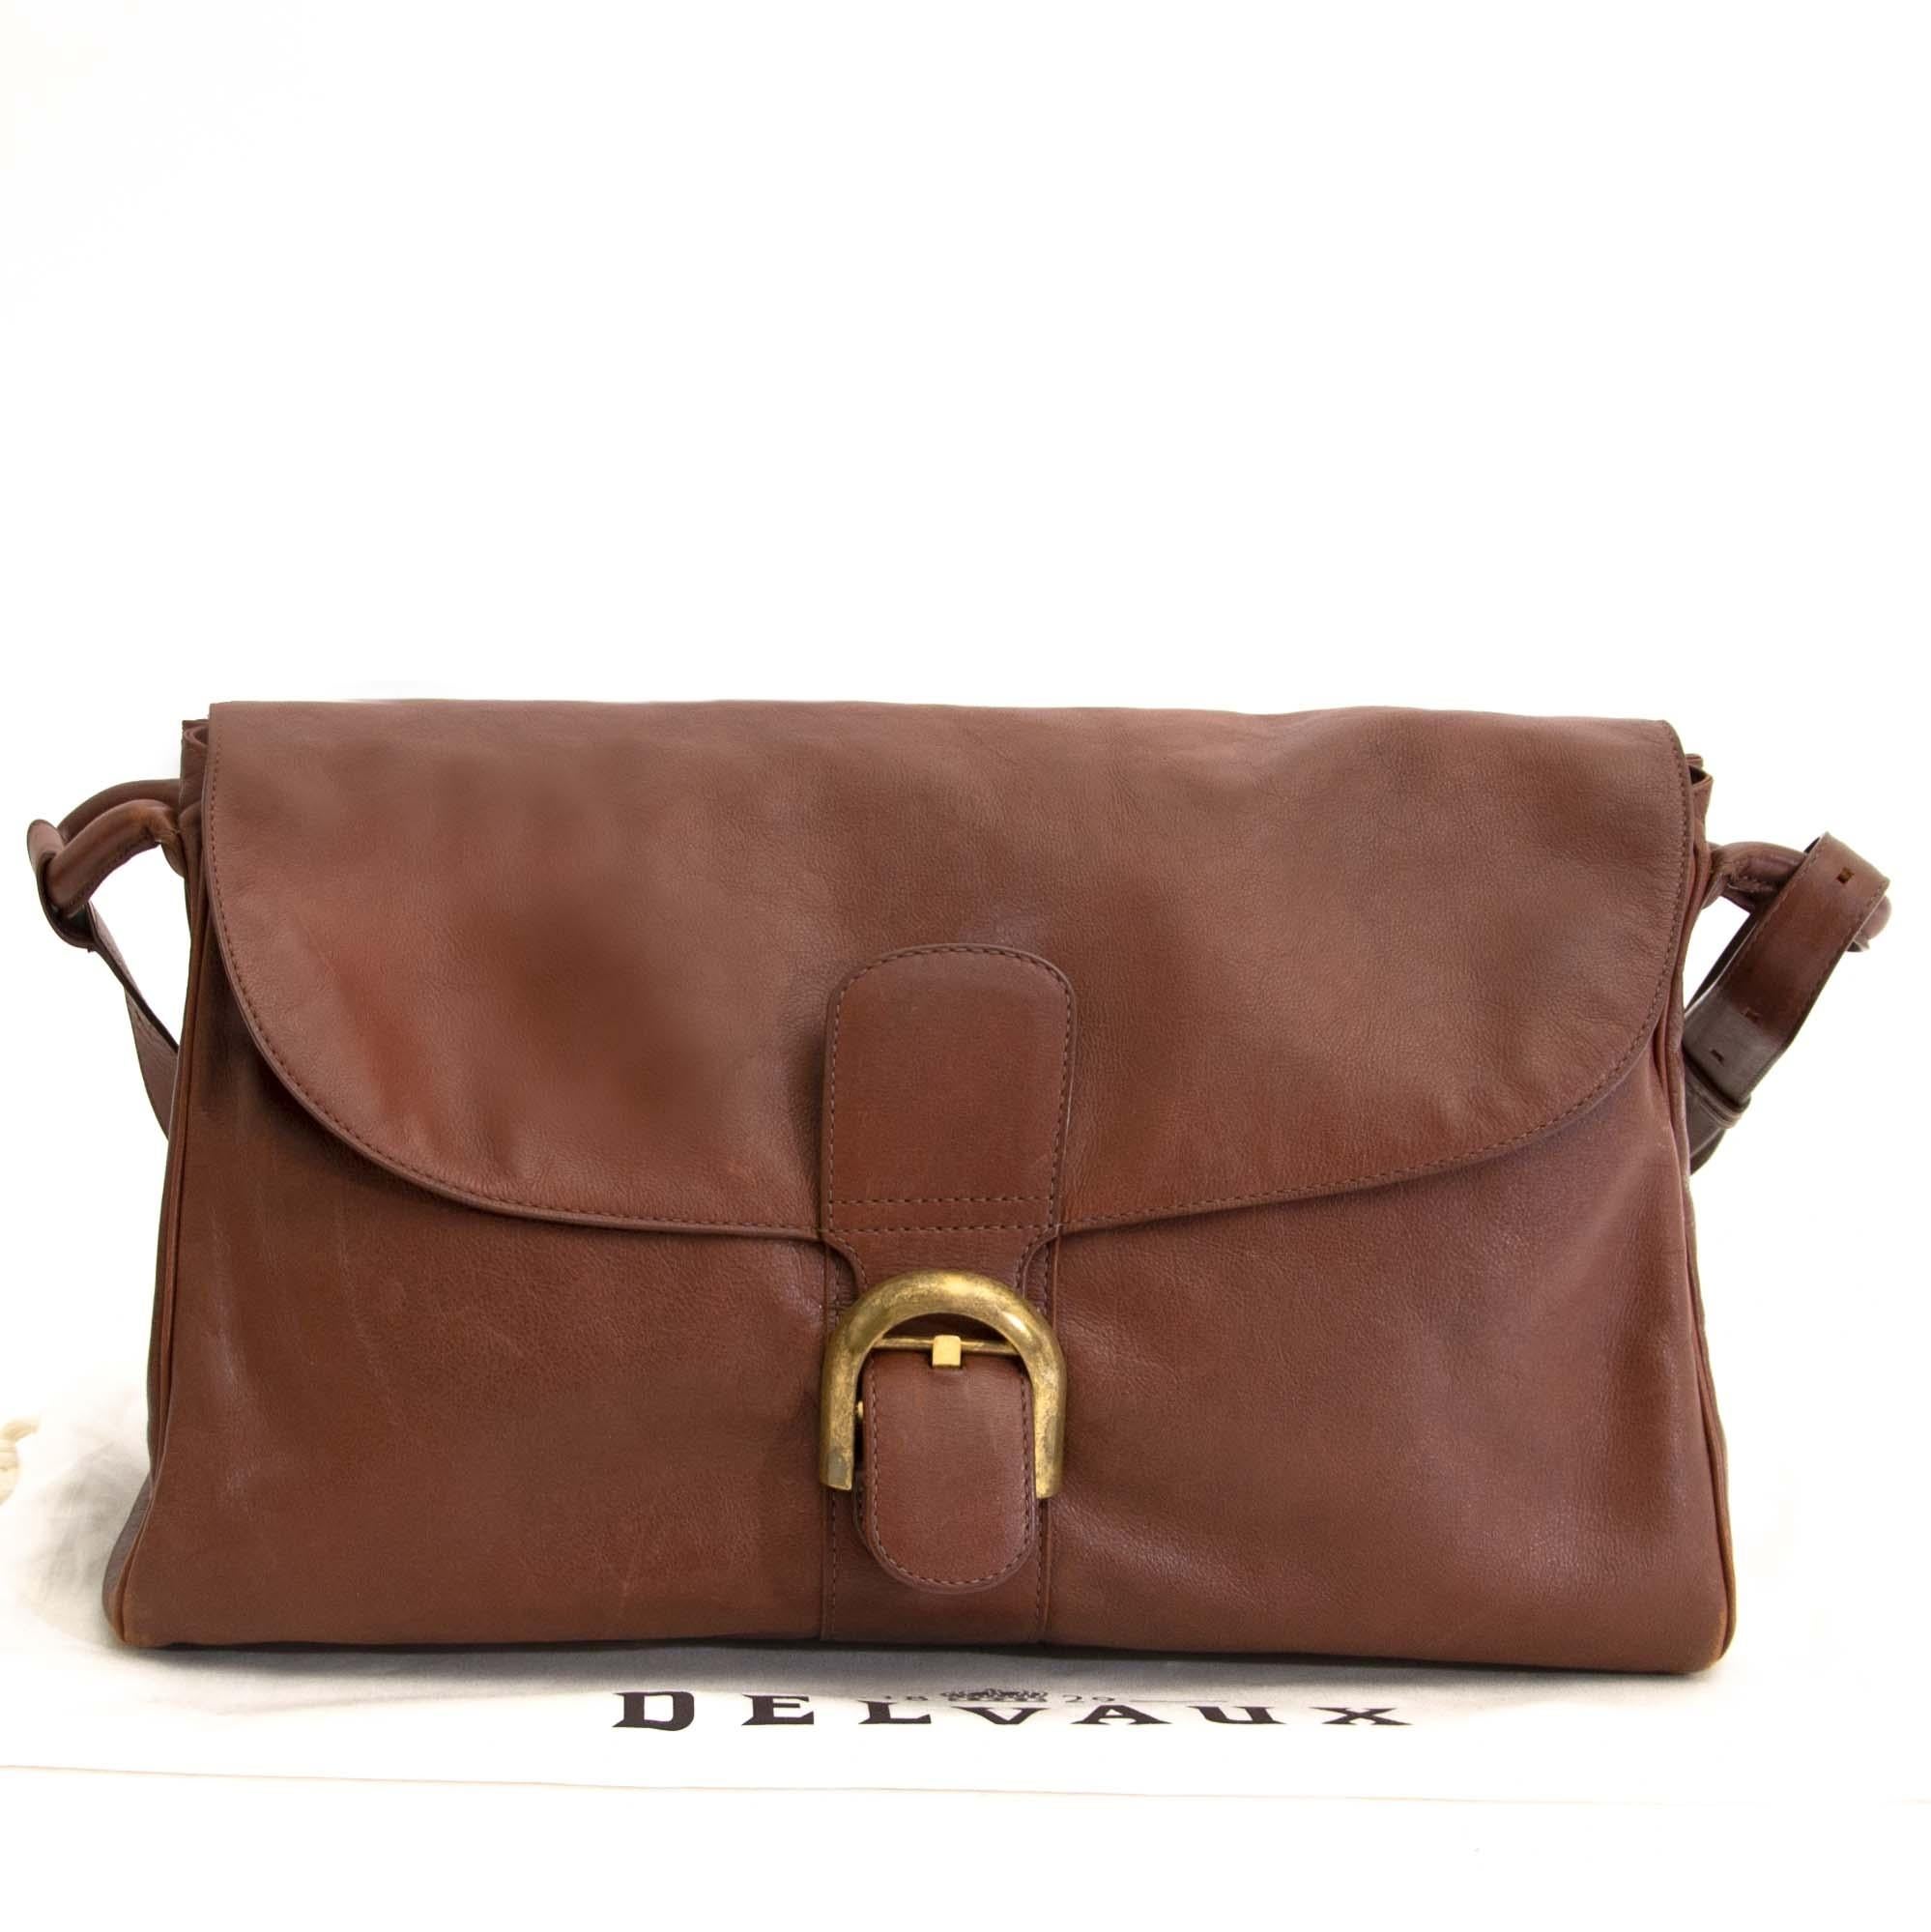 Good preloved condition

Delvaux Brillant Brown Shoulder Bag

This Delvaux Brillant features brown leather and a gold 'D' buckle.

The intirior has one compartment with zipper and two without zipper. there is also a handy little compartment for your